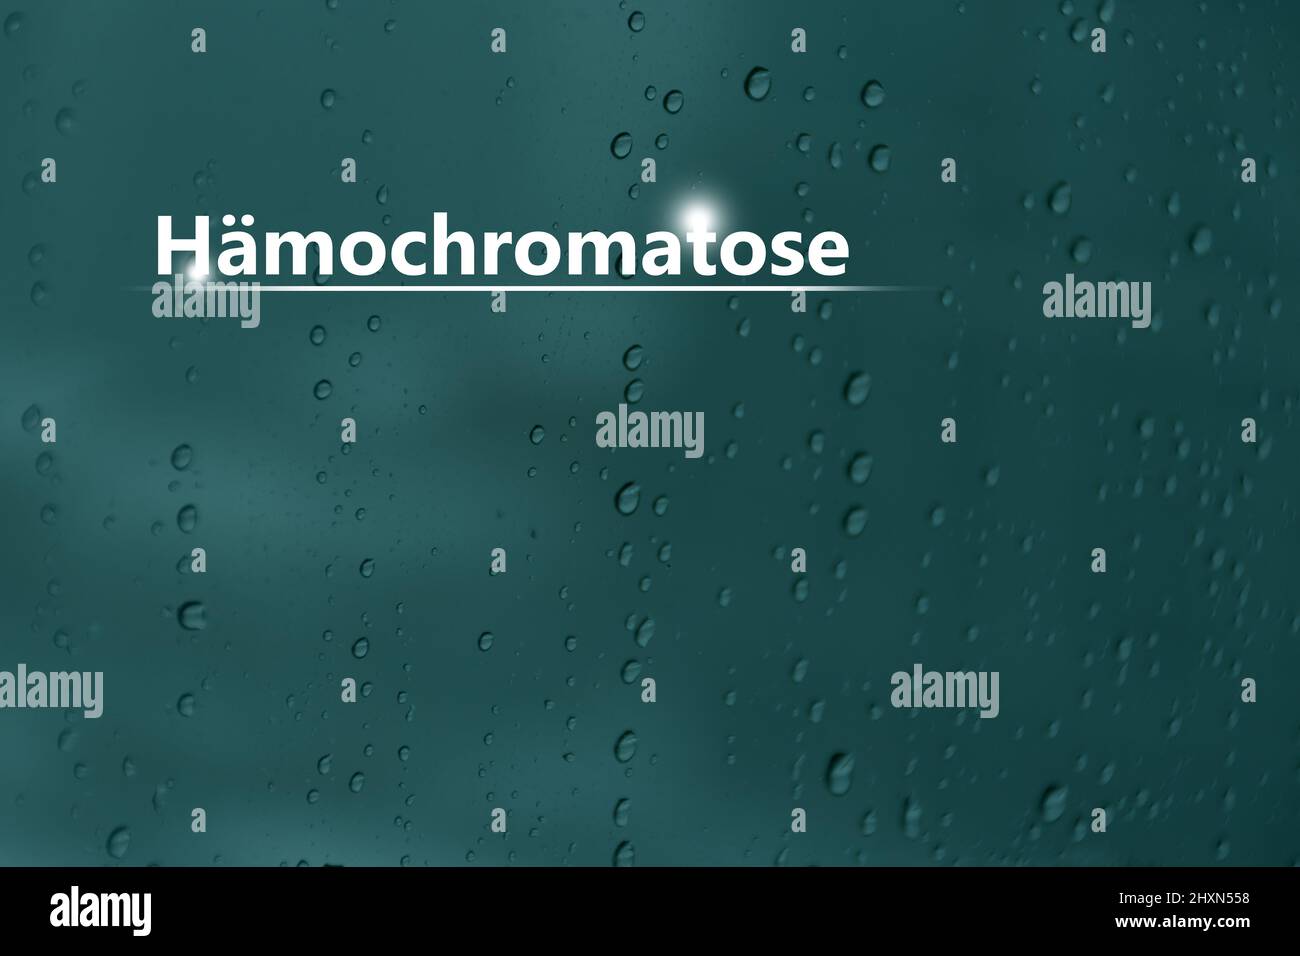 Medical banner 'Hemochromatosis' on blue background with drops and large copy space for text or checklist. Stock Photo